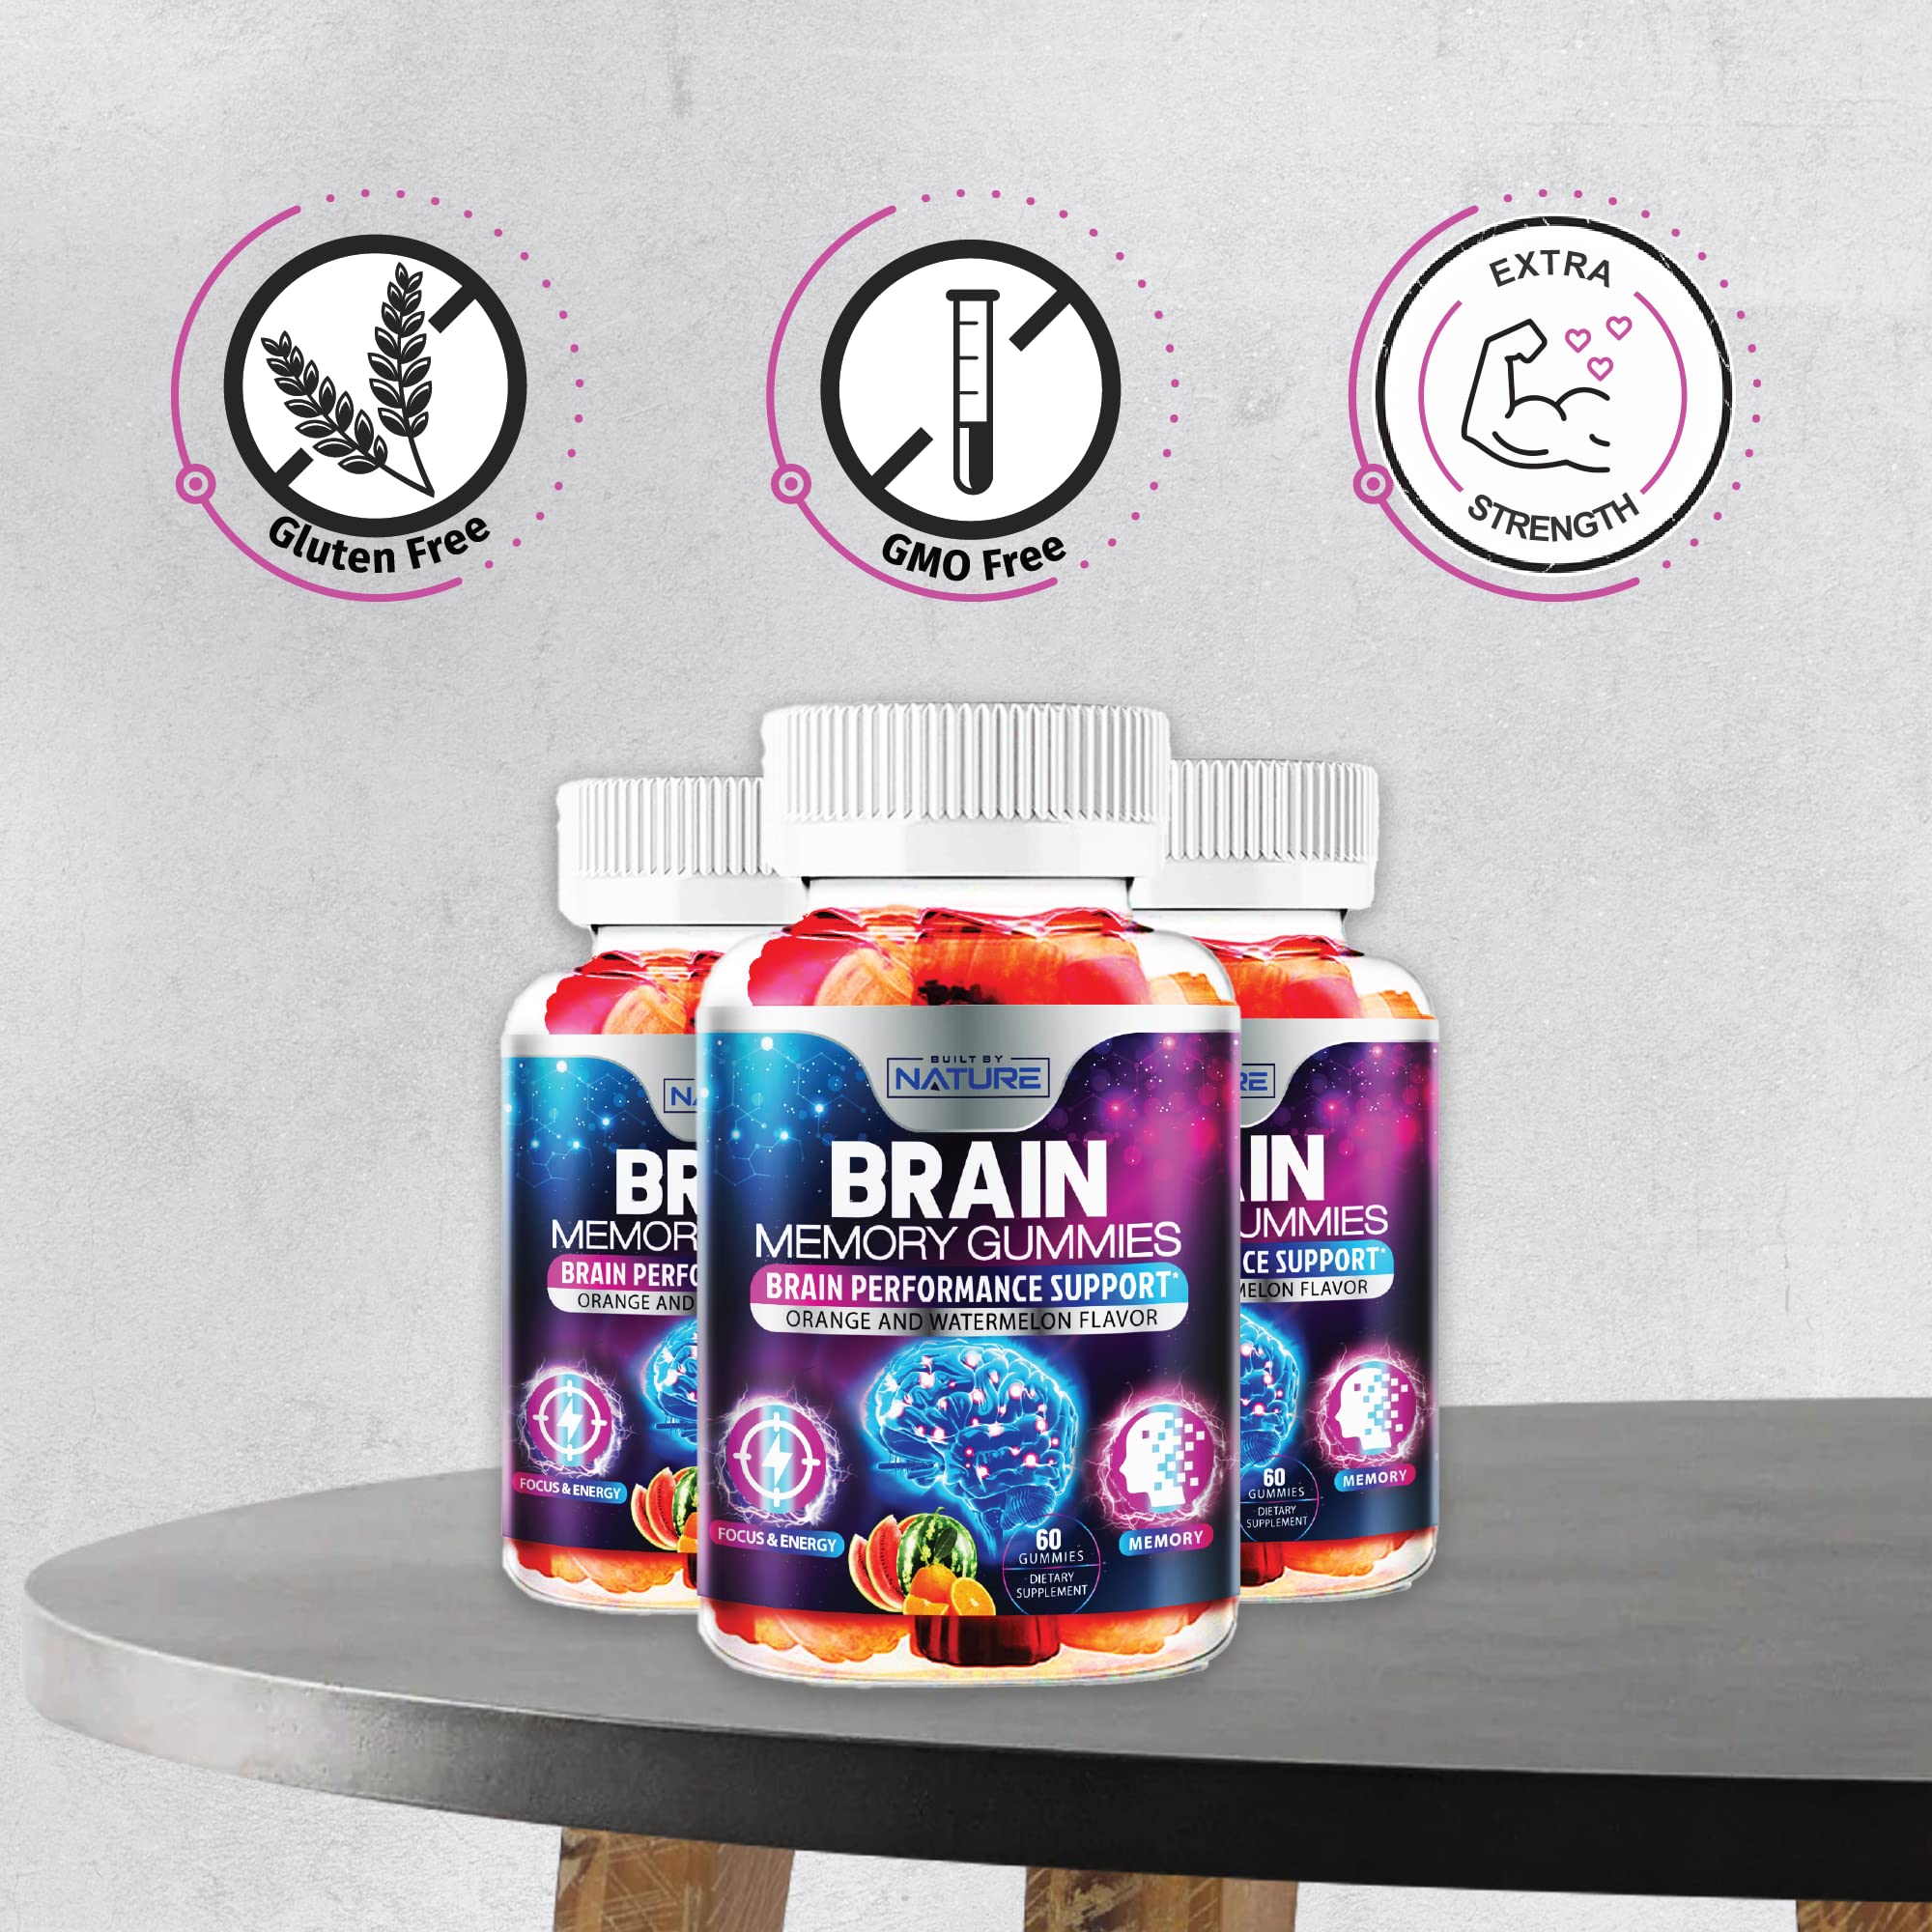 Nootropic Brain Booster Gummies Supplement - Memory, Focus & Concentration Gummy with Vitamins B6 & B12, Proven and Tested Phosphatidylserine - Natural Cognitive Function & Energy Boost, 60 Gummies